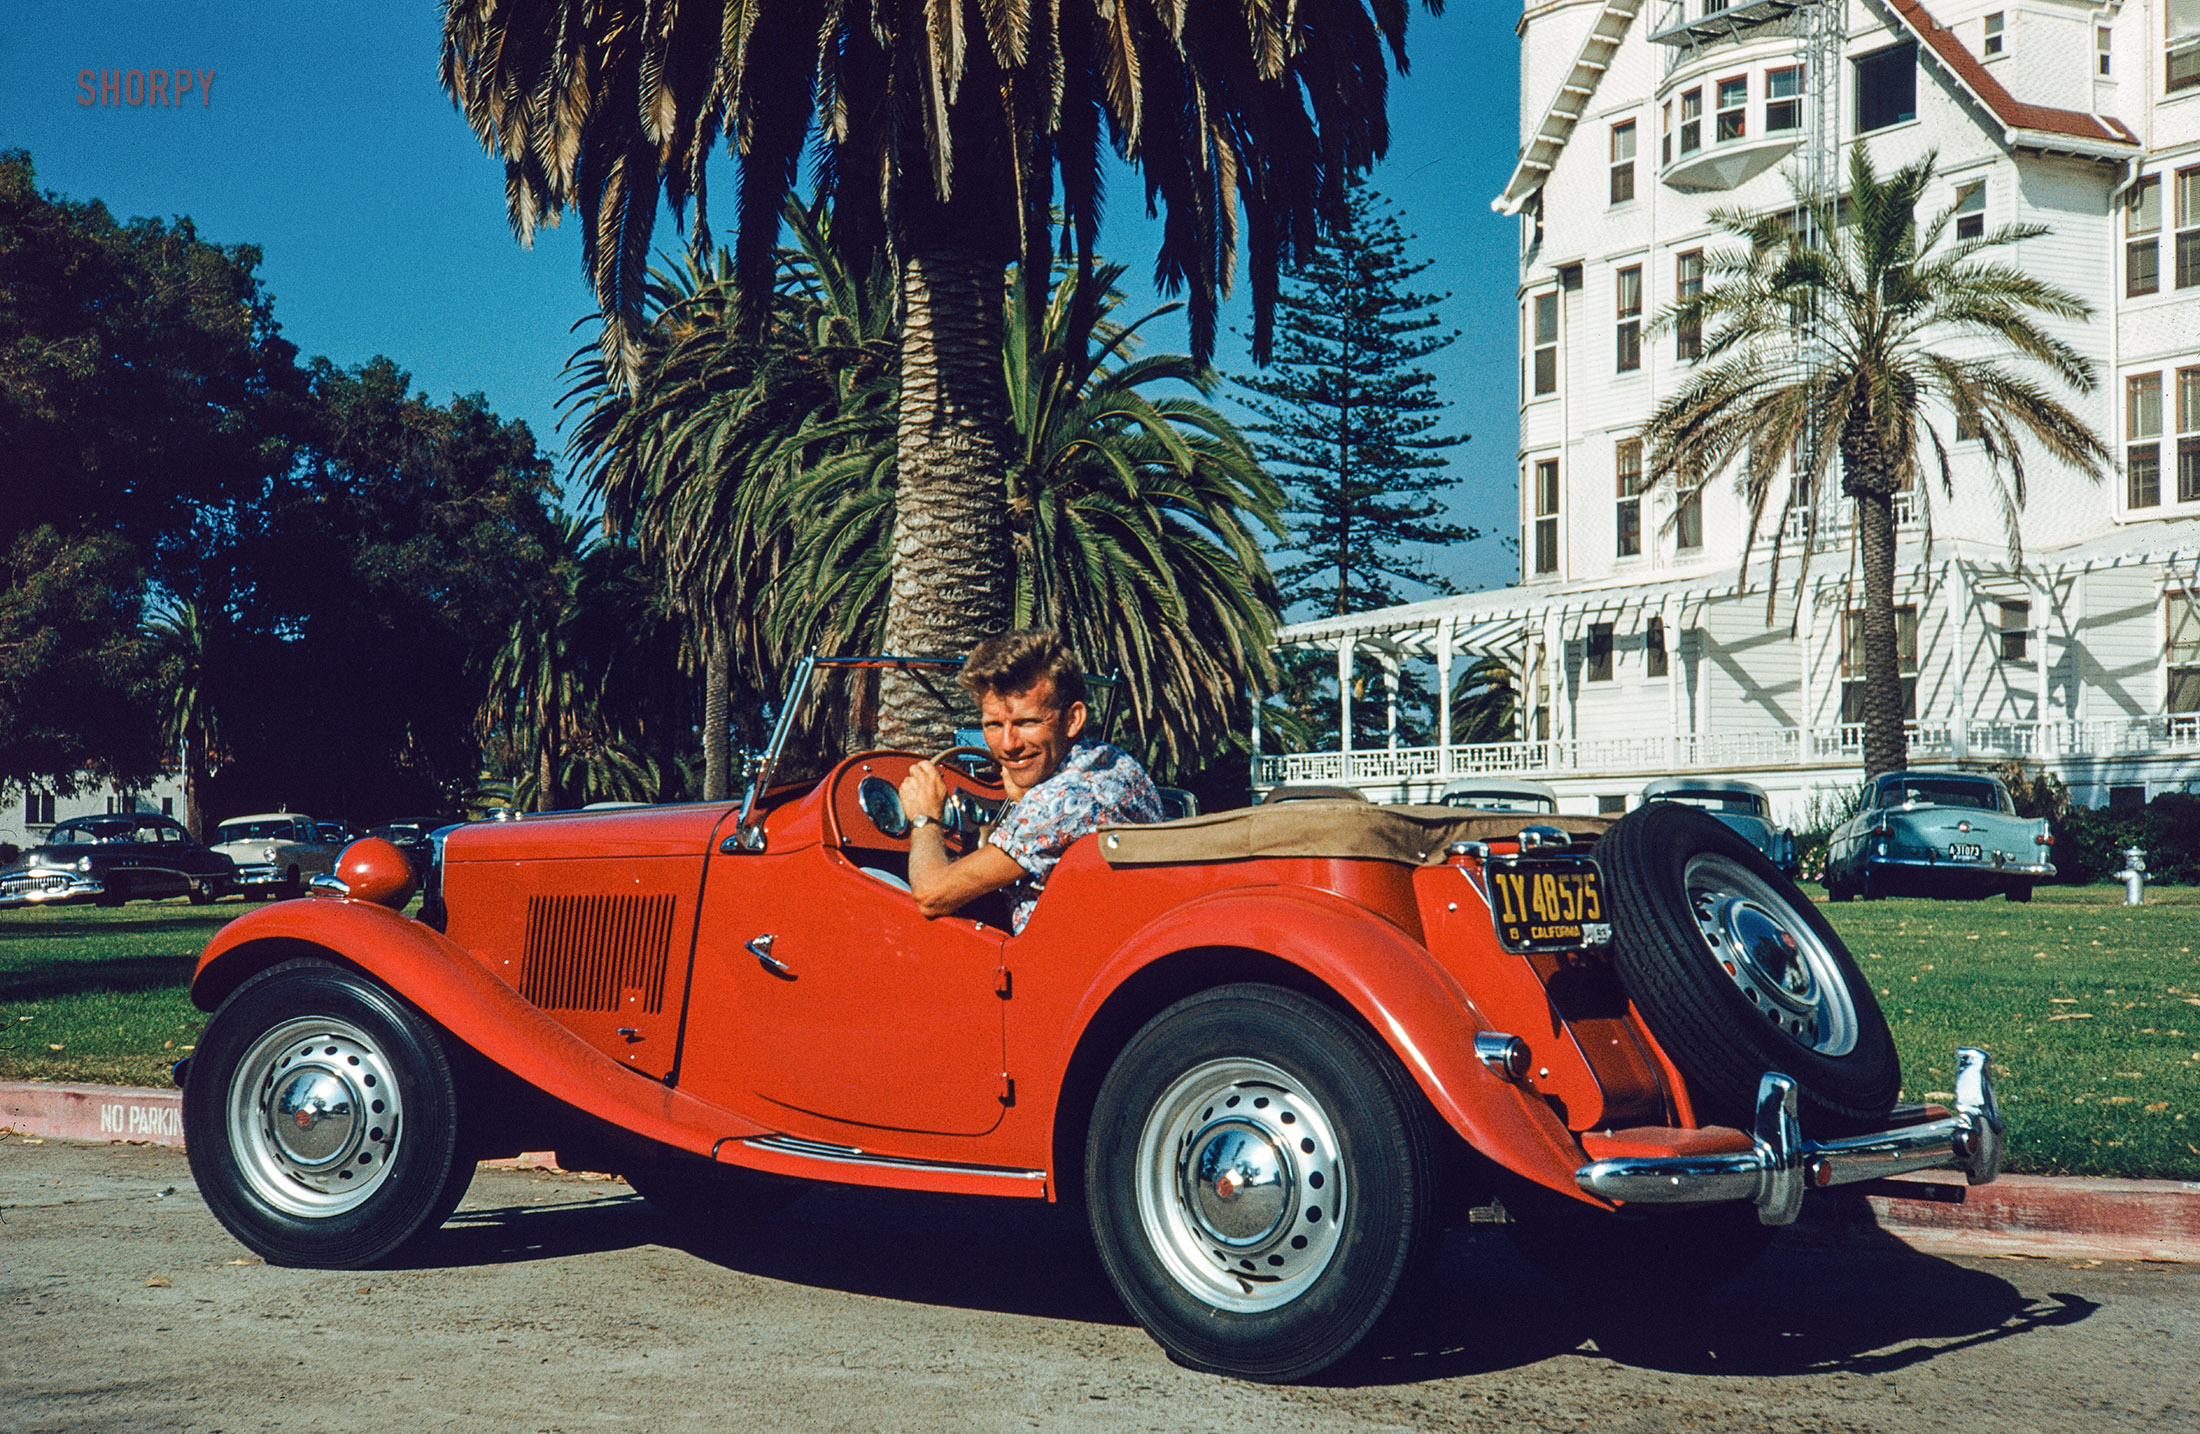 From 1953 comes this 35mm Kodachrome of hot-rodder and finer-things-appreciator Don Cox in a Tabasco-red MG at the Hotel Del Coronado in San Diego. Wanna race? View full size.